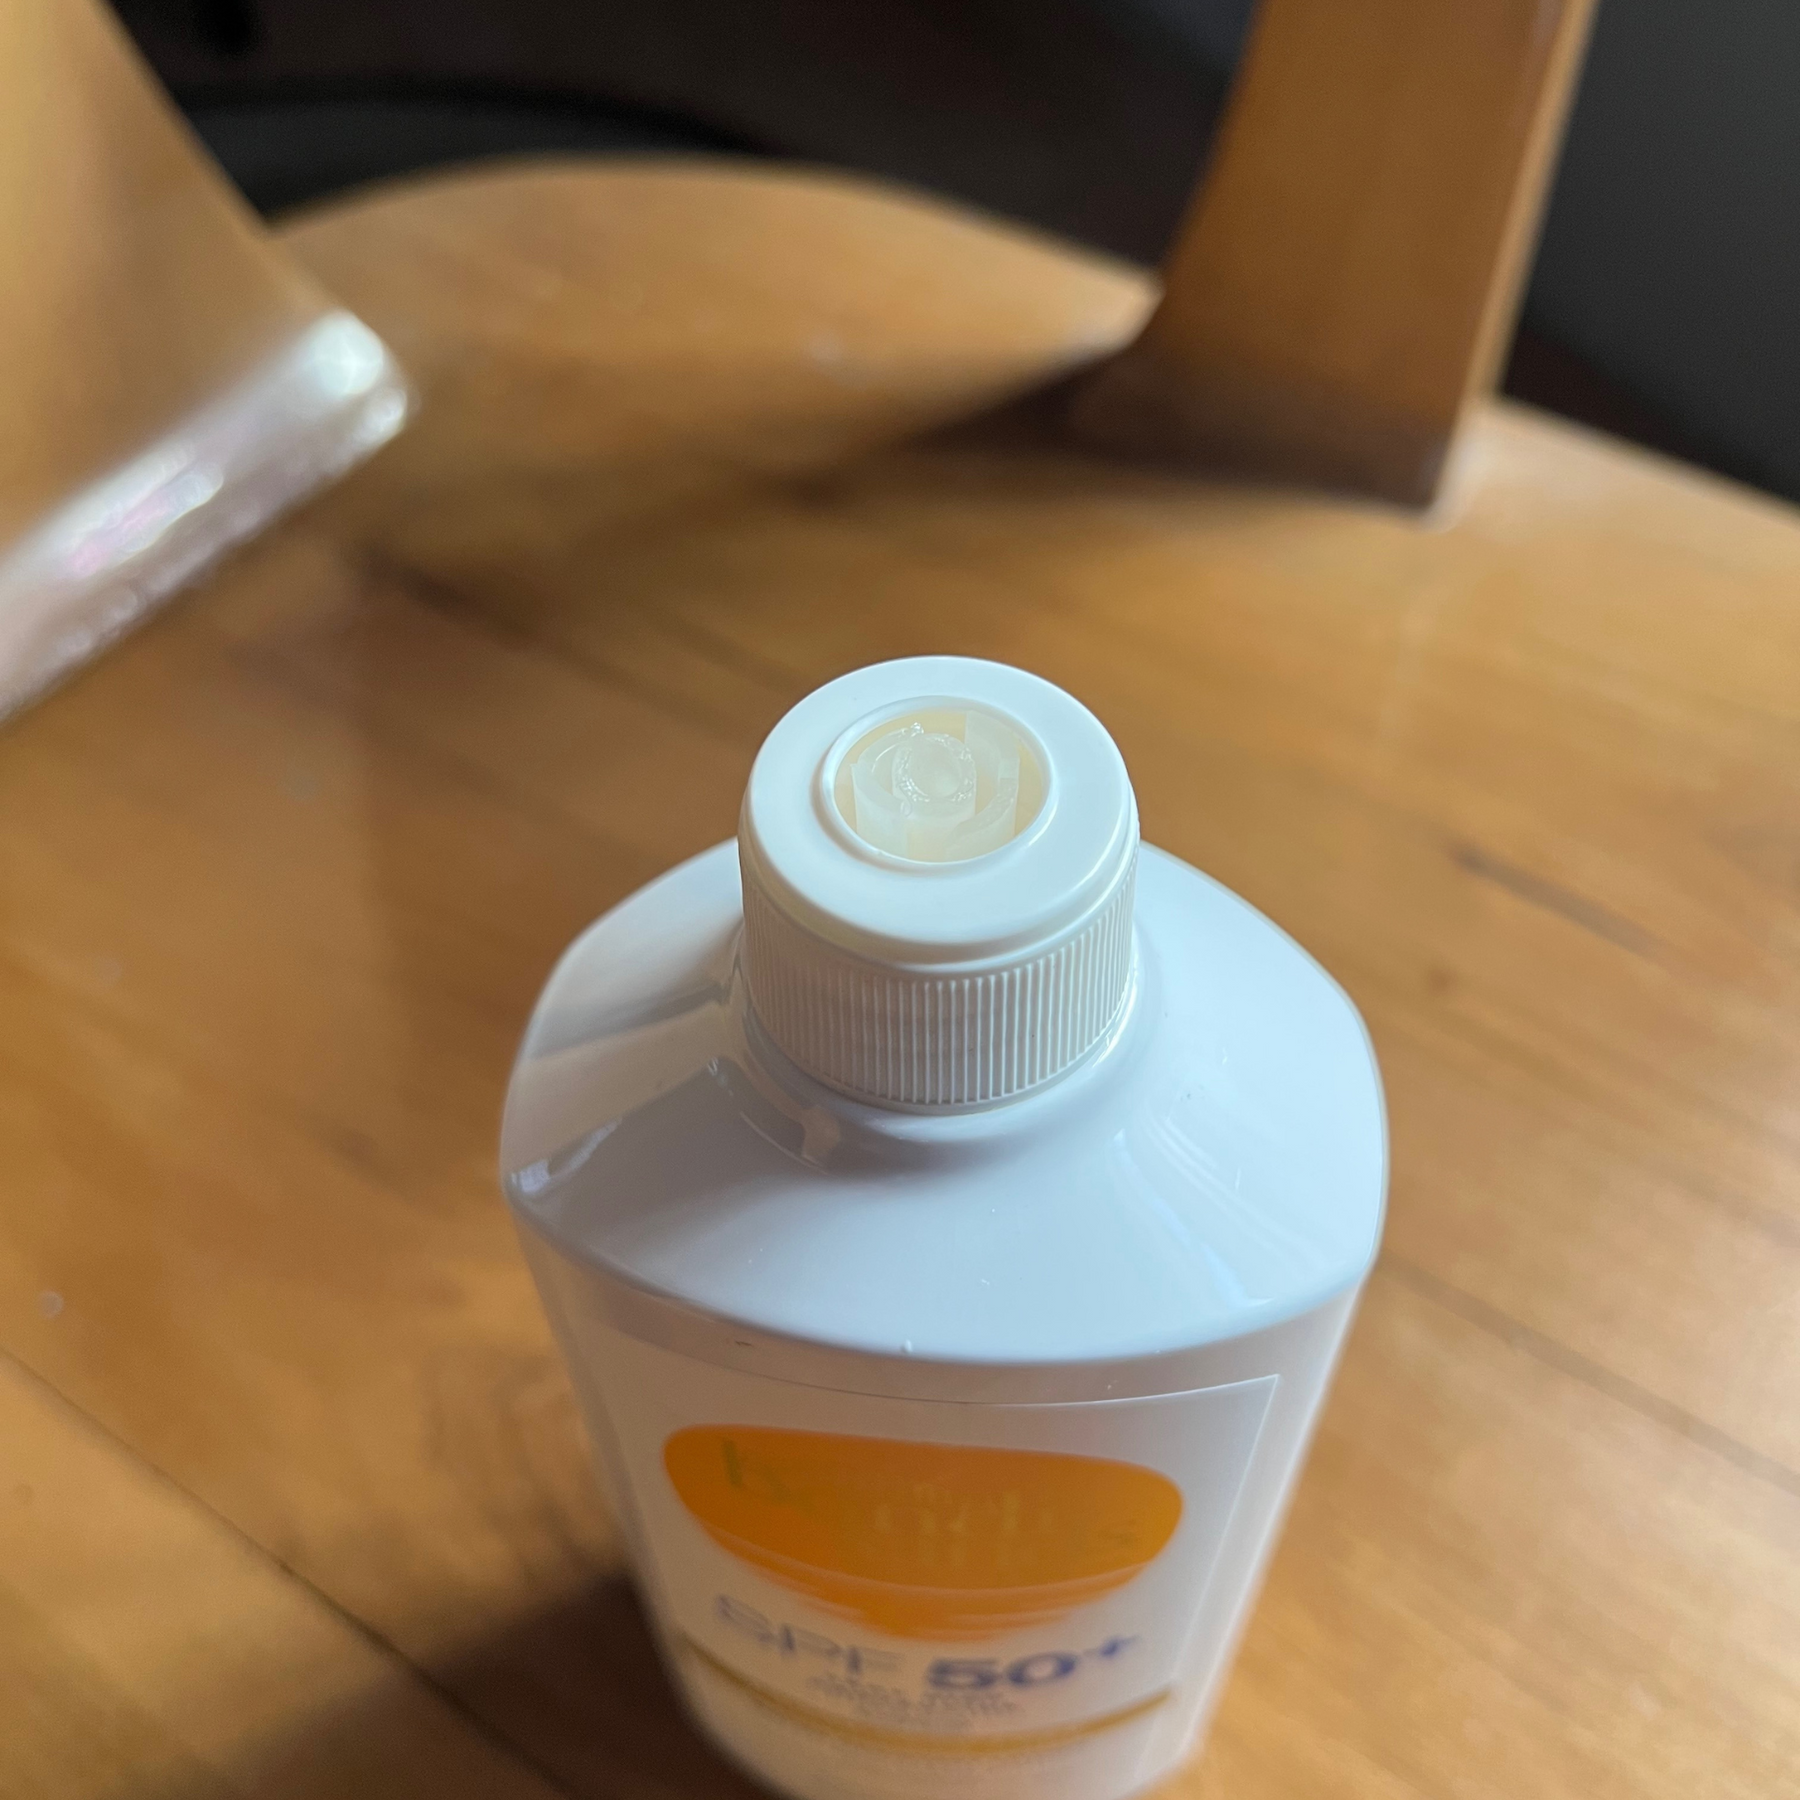 SPF 50+ Fragrance Free Sunscreen Lotion with Broken Pump